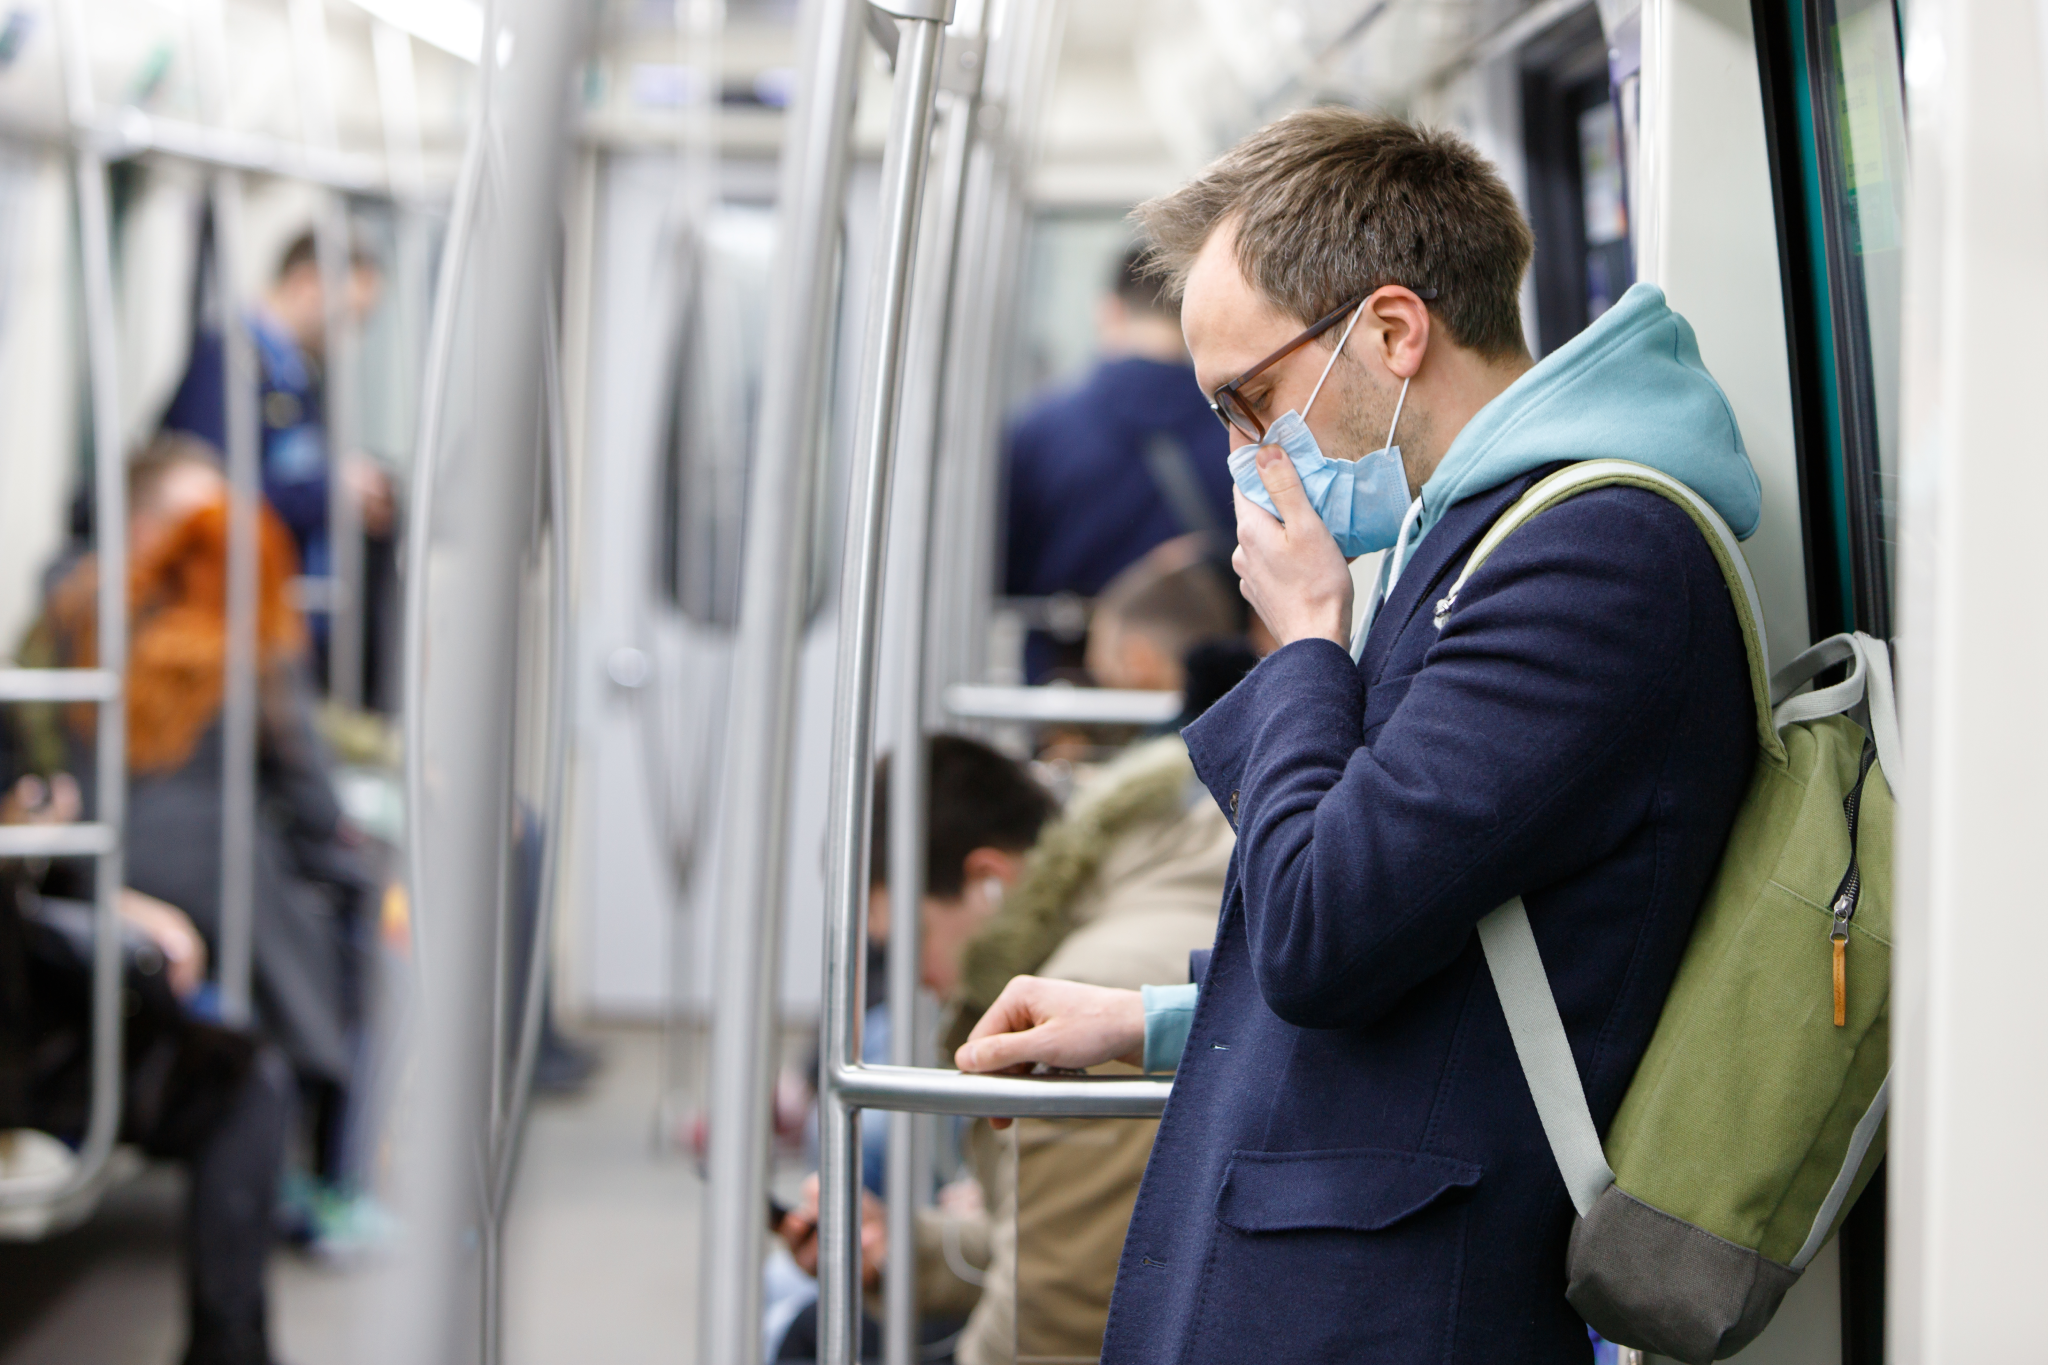 Here’s what we should ban on the subway instead of masks